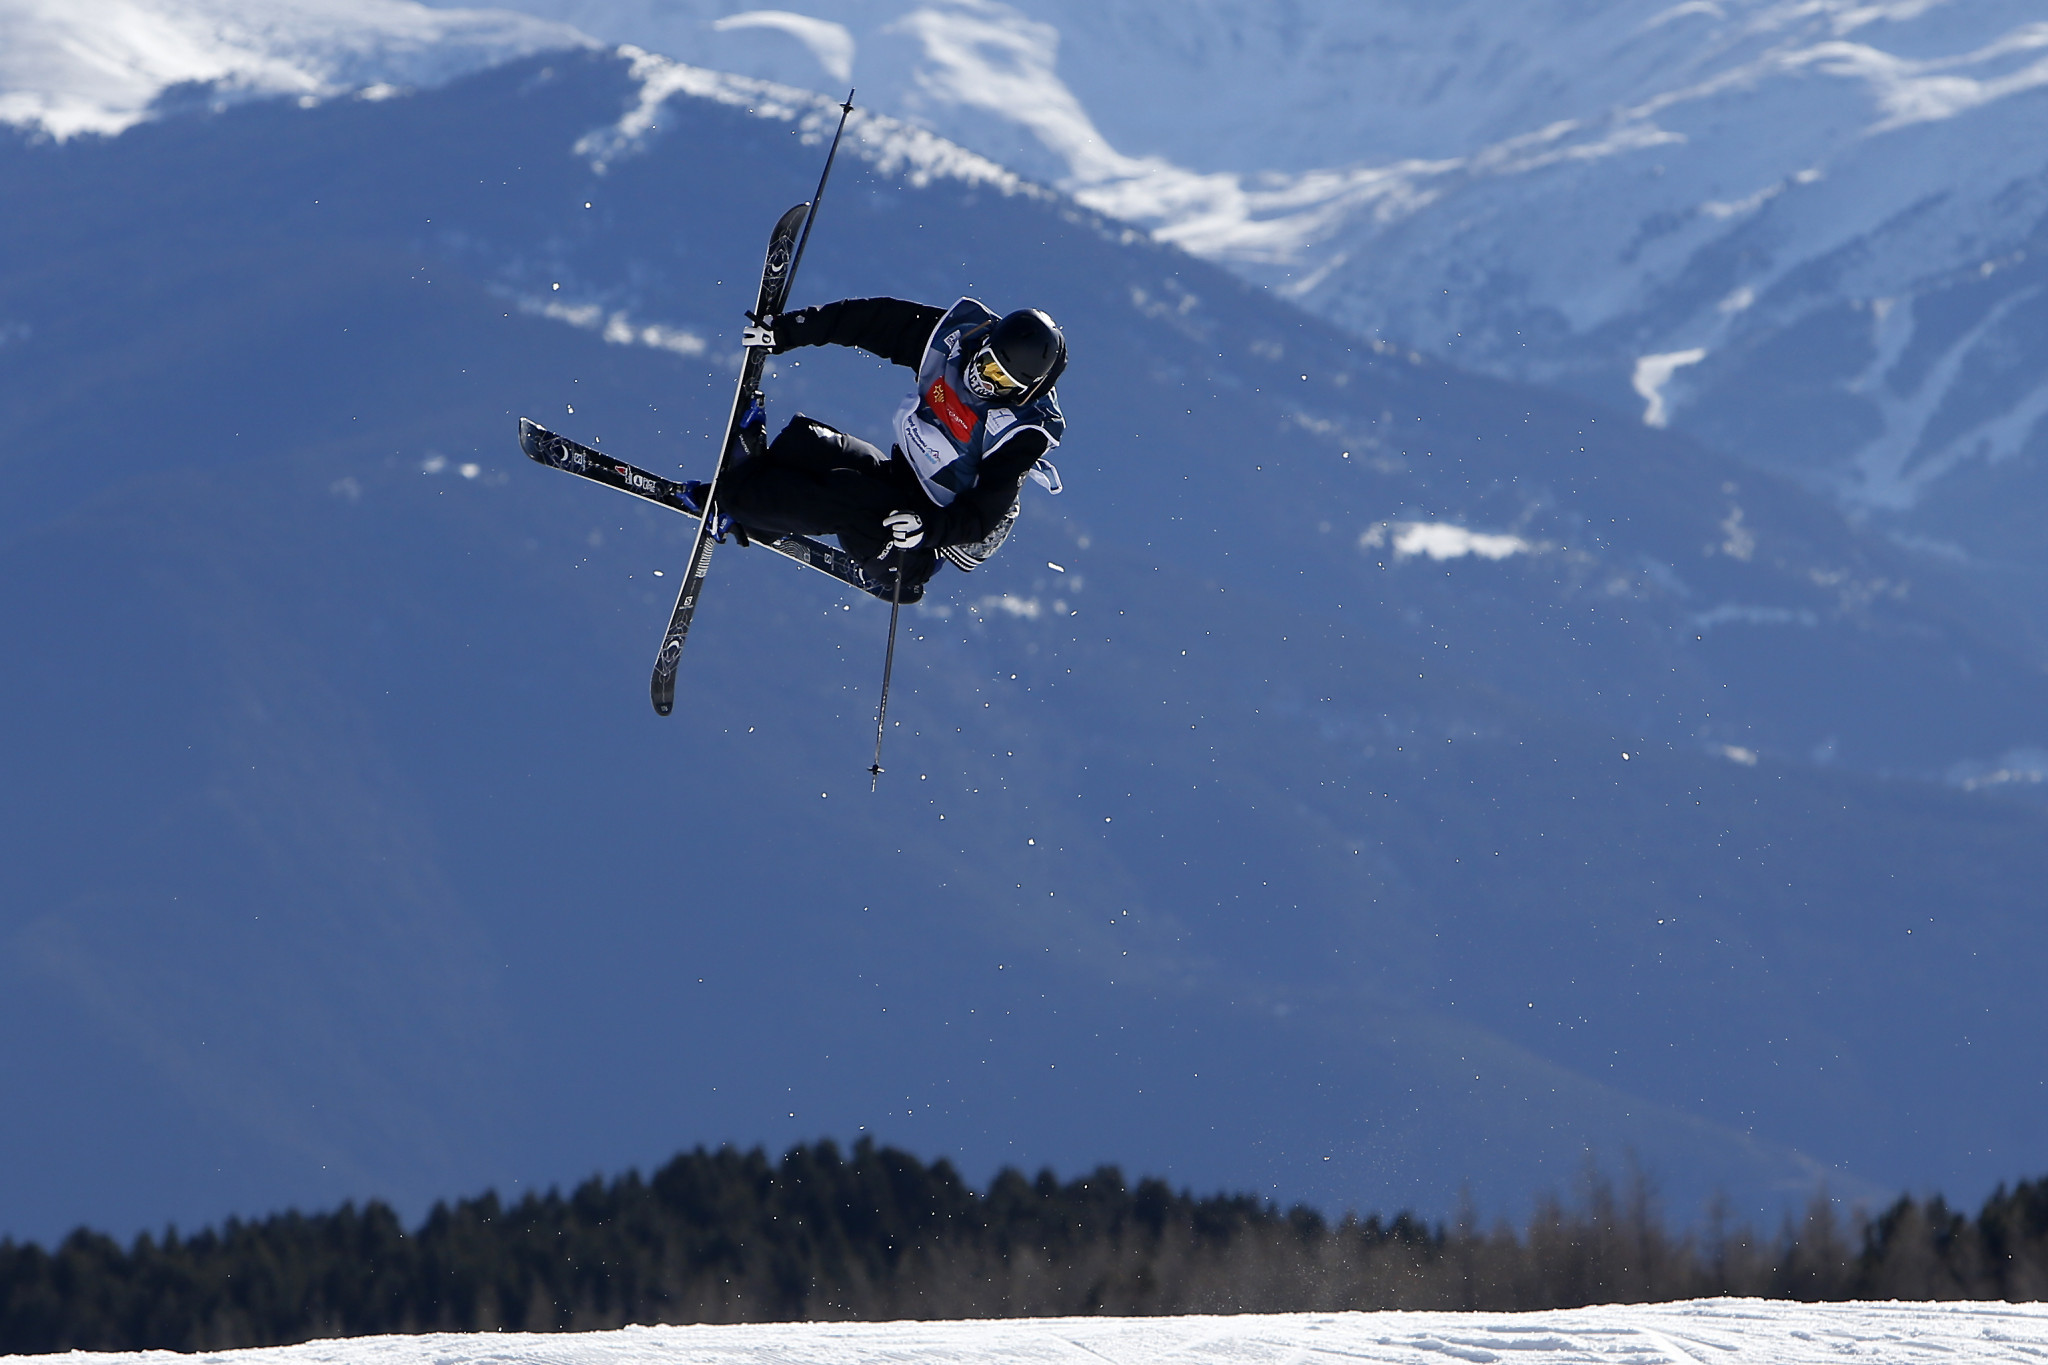 FIS Freestyle Skiing World Cup set to resume with slopestyle event in